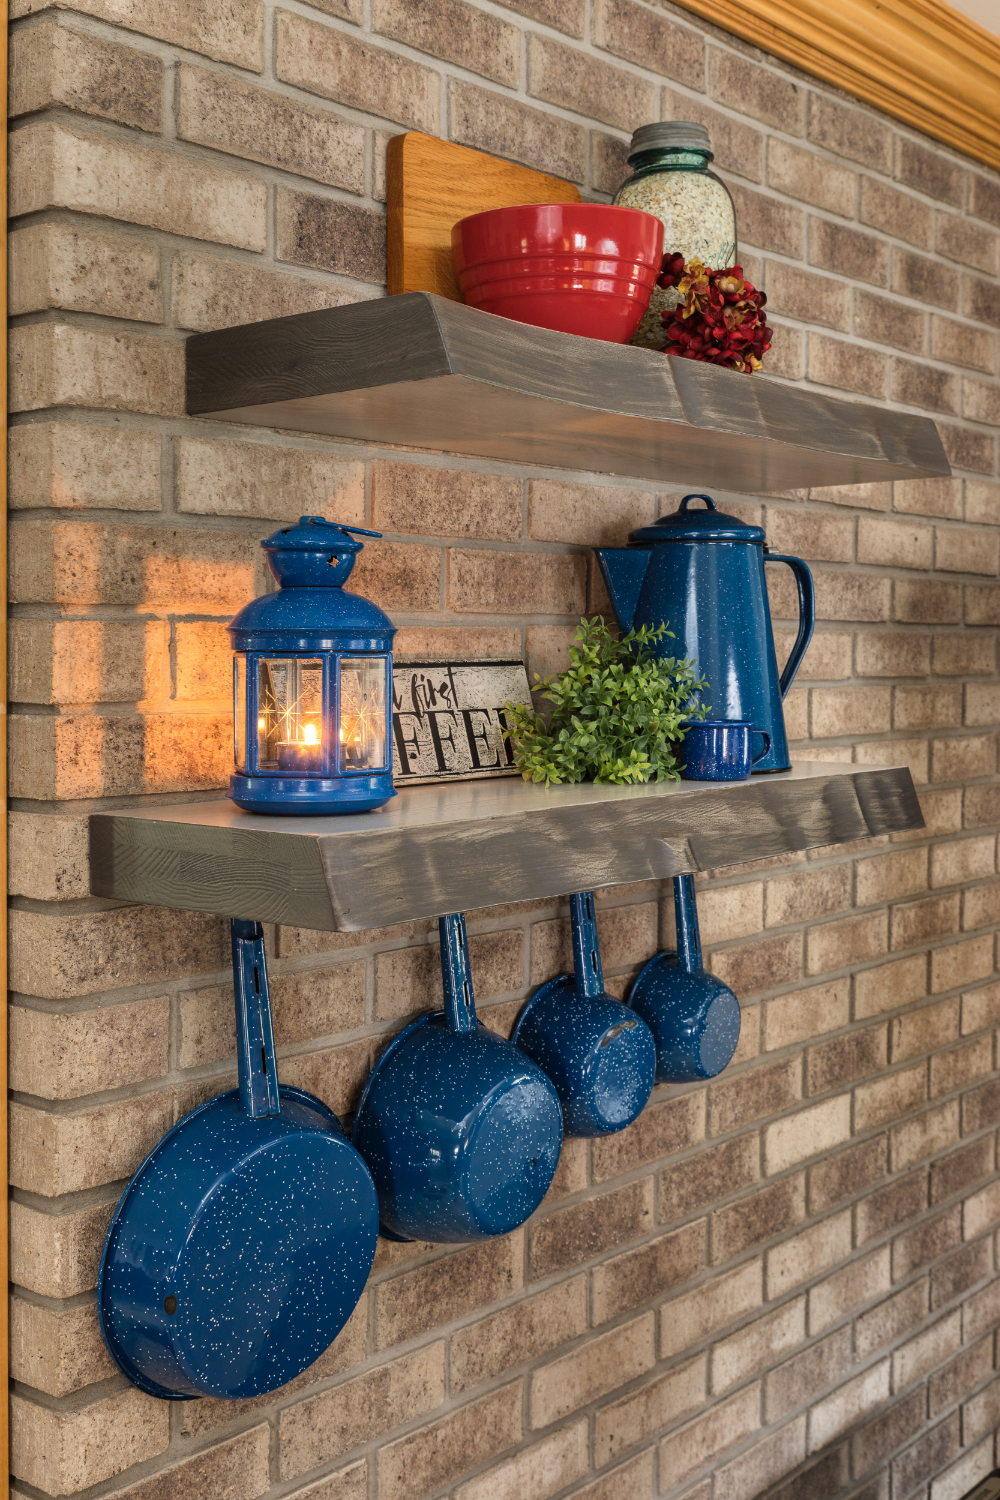 Custom Built Floating Wall Shelves, How To Hang Floating Shelves On A Brick Wall